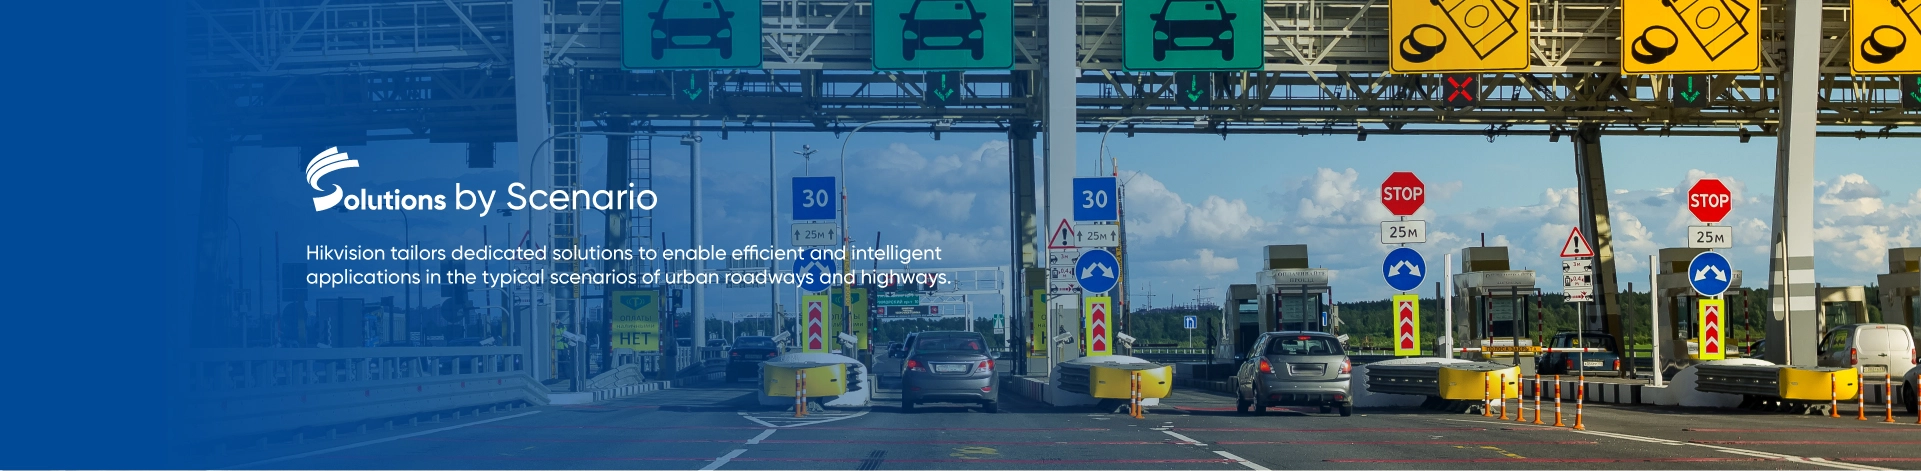 Hikvision tailors dedicated solutions to enable efficiency and intelligence in the most common urban roadway and expressway scenarios.